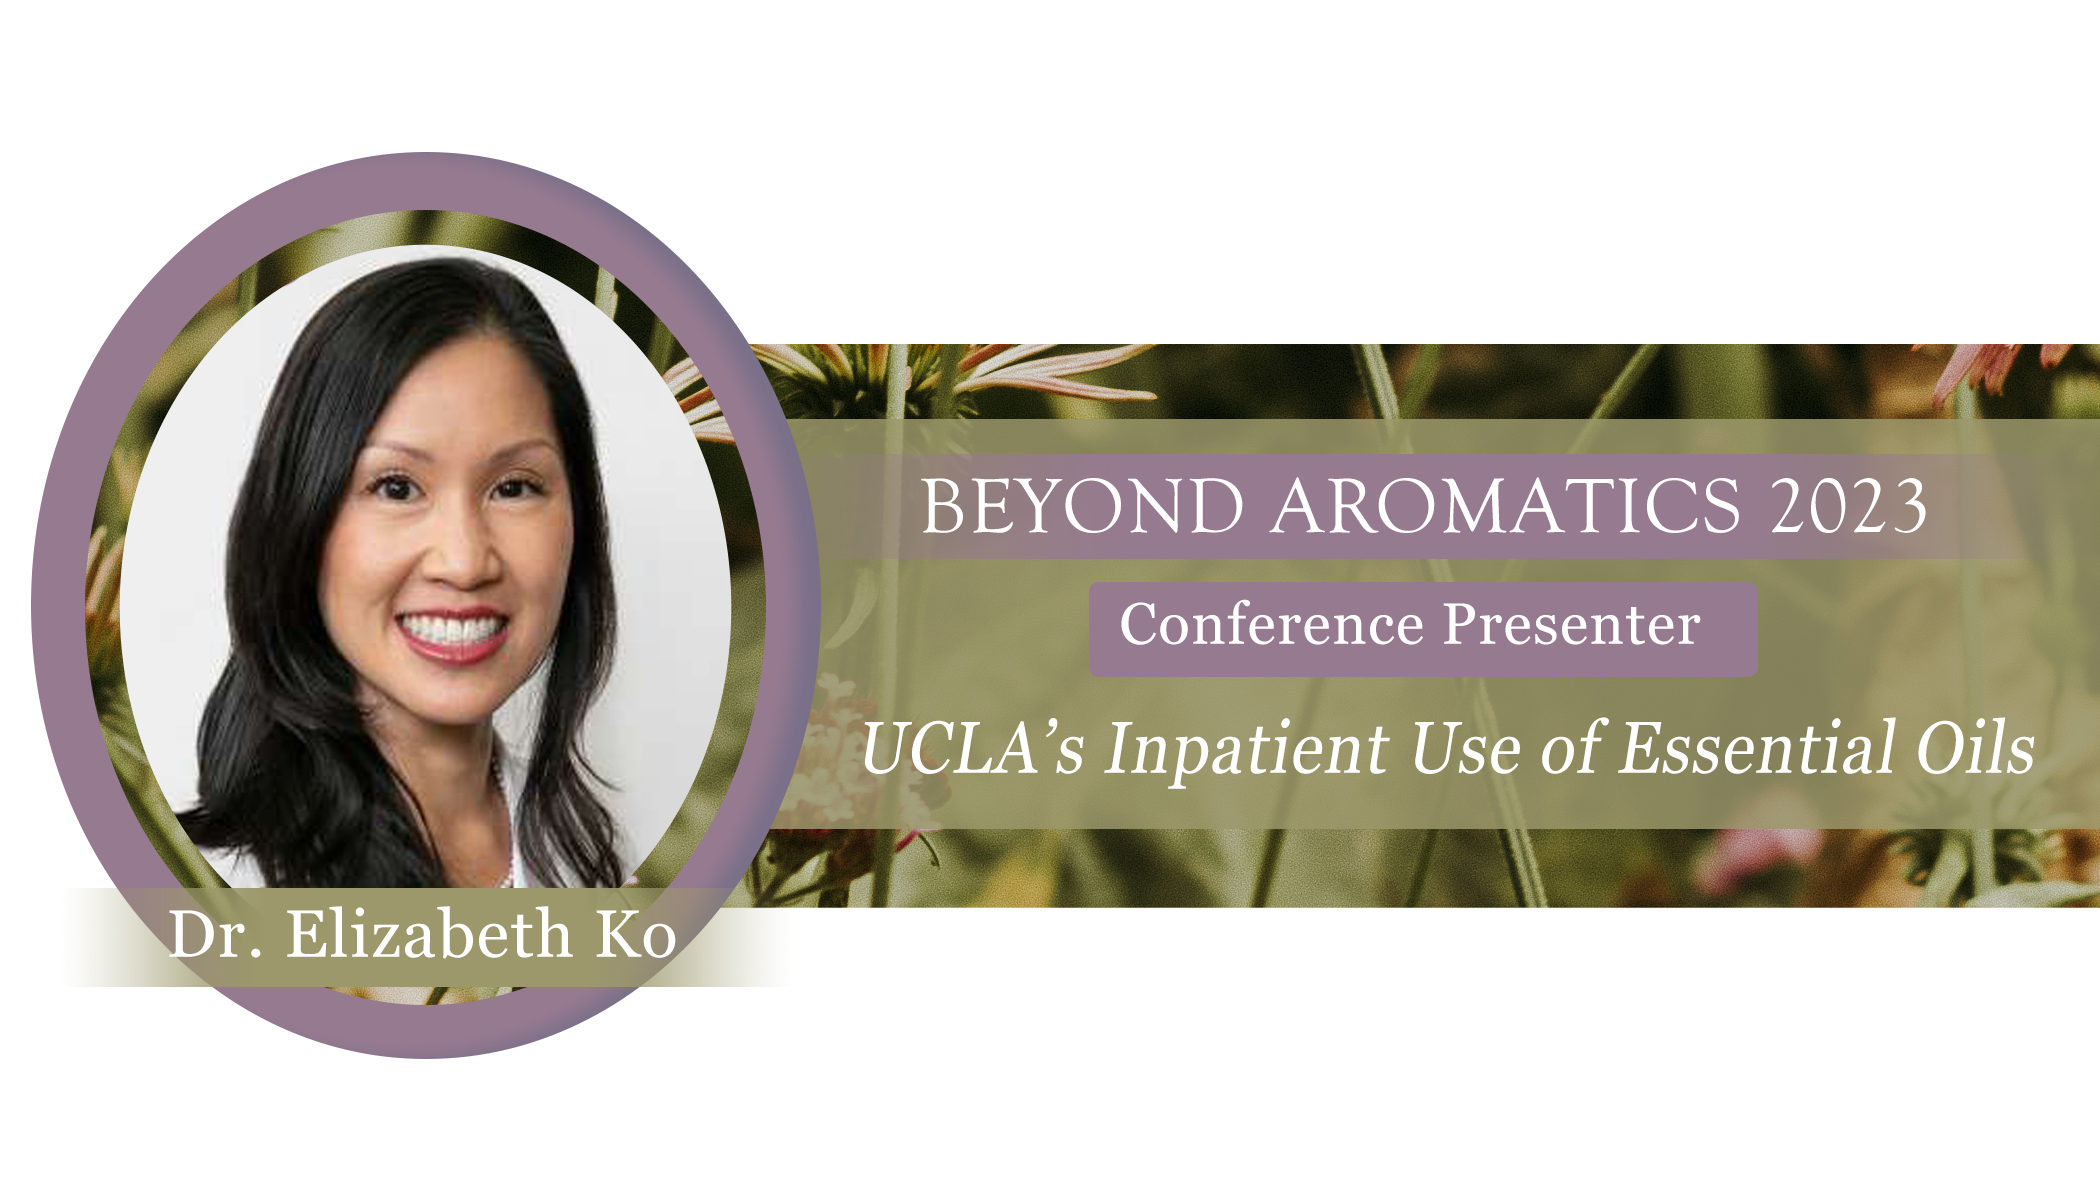 UCLA Inpatient Use of Essential Oils